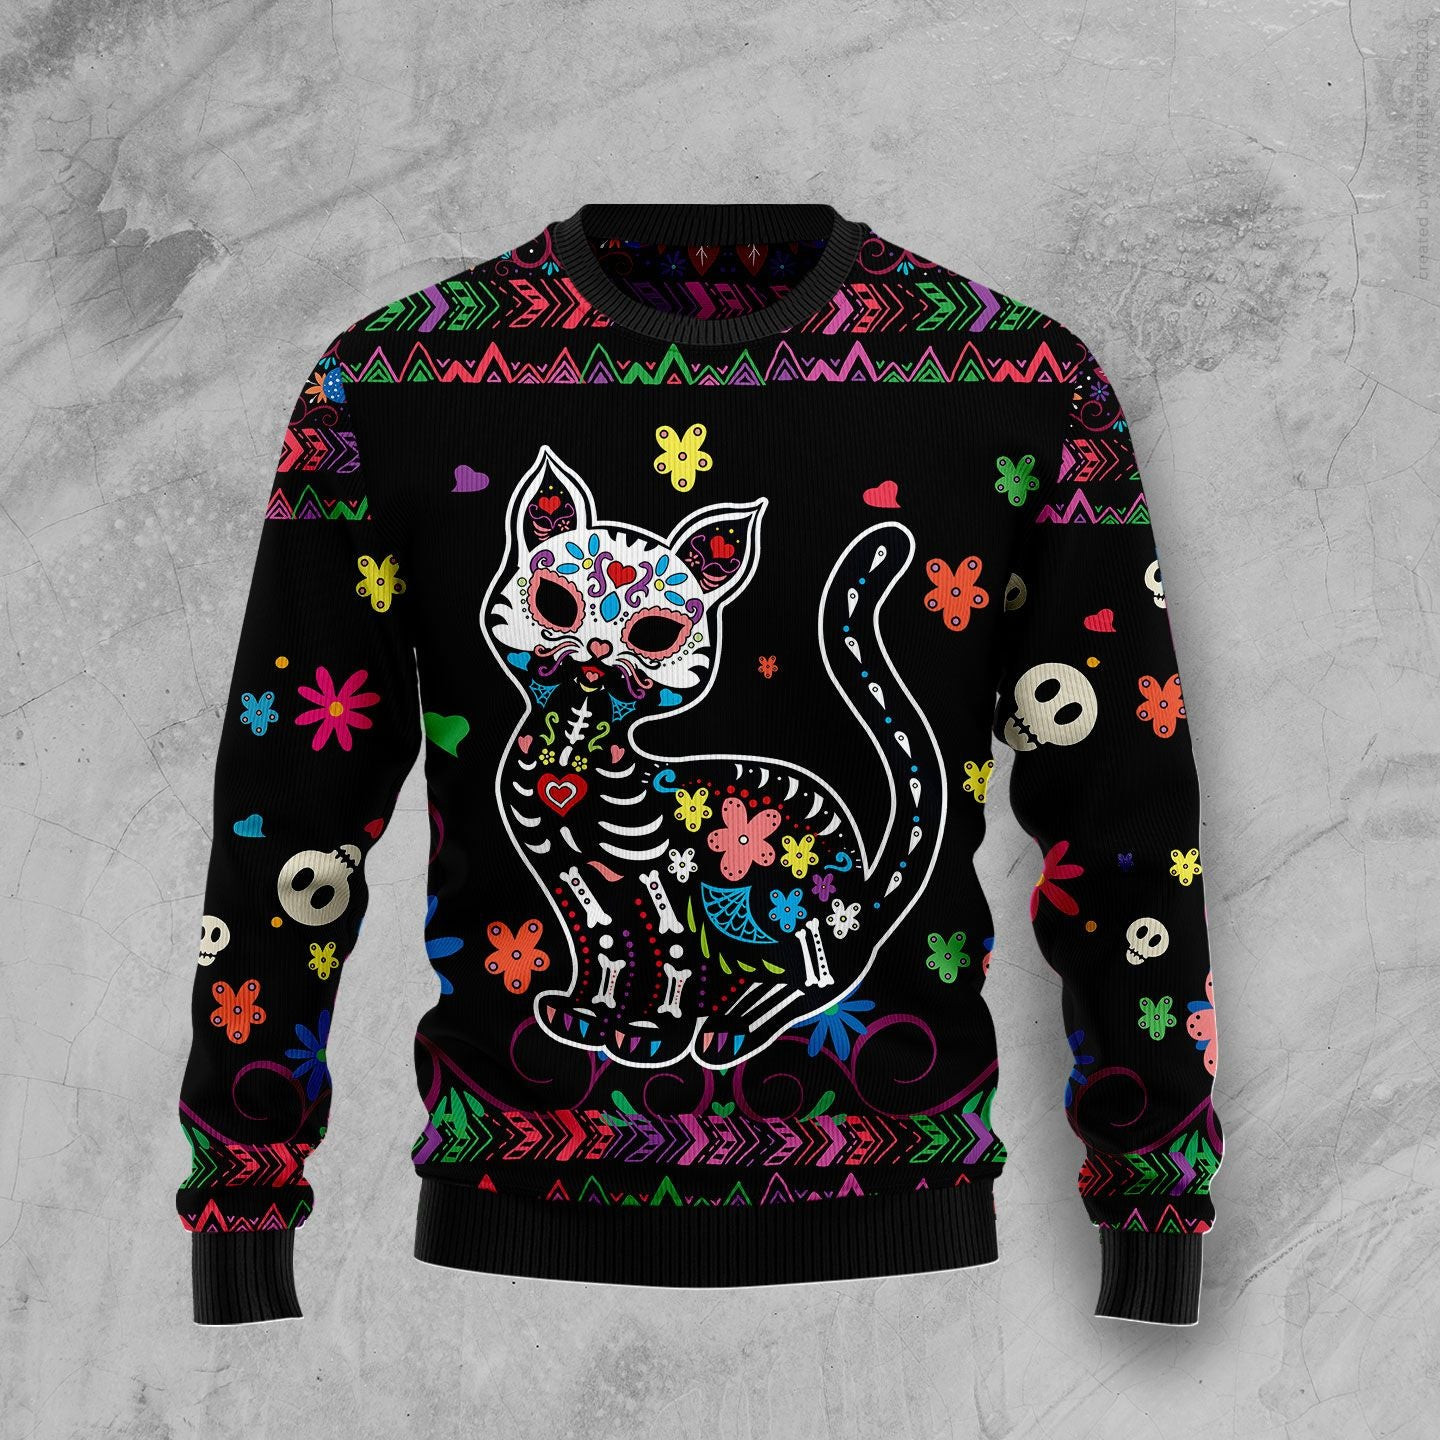 Cat Sugar Skull Ugly Christmas Sweater, Ugly Sweater For Men Women, Holiday Sweater